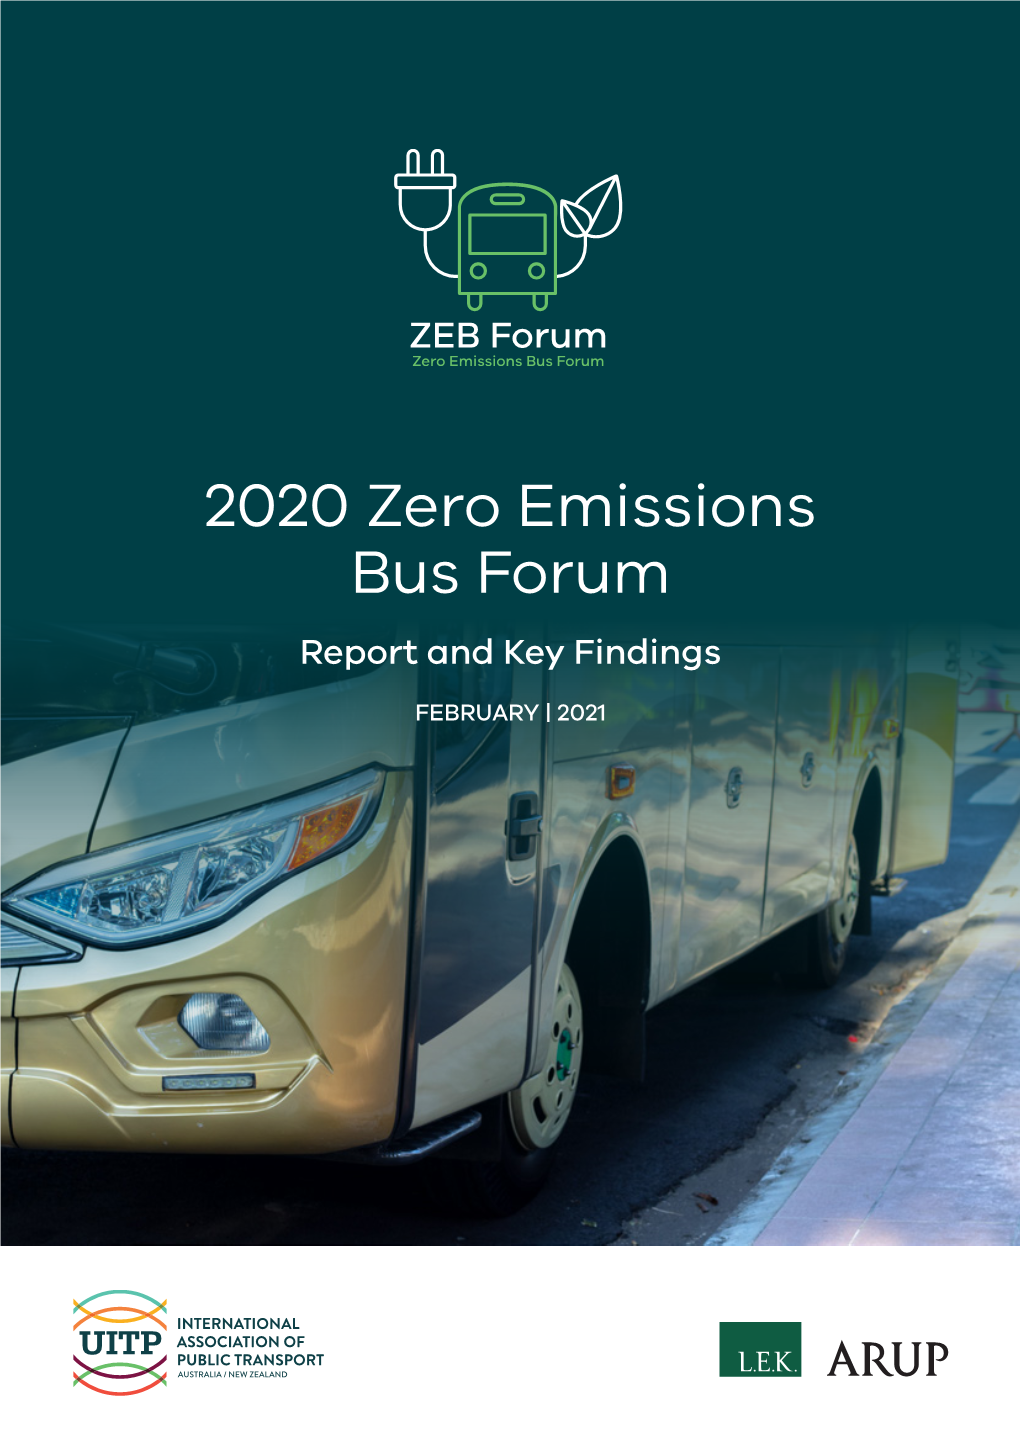 2020 Zero Emissions Bus Forum Report and Key Findings